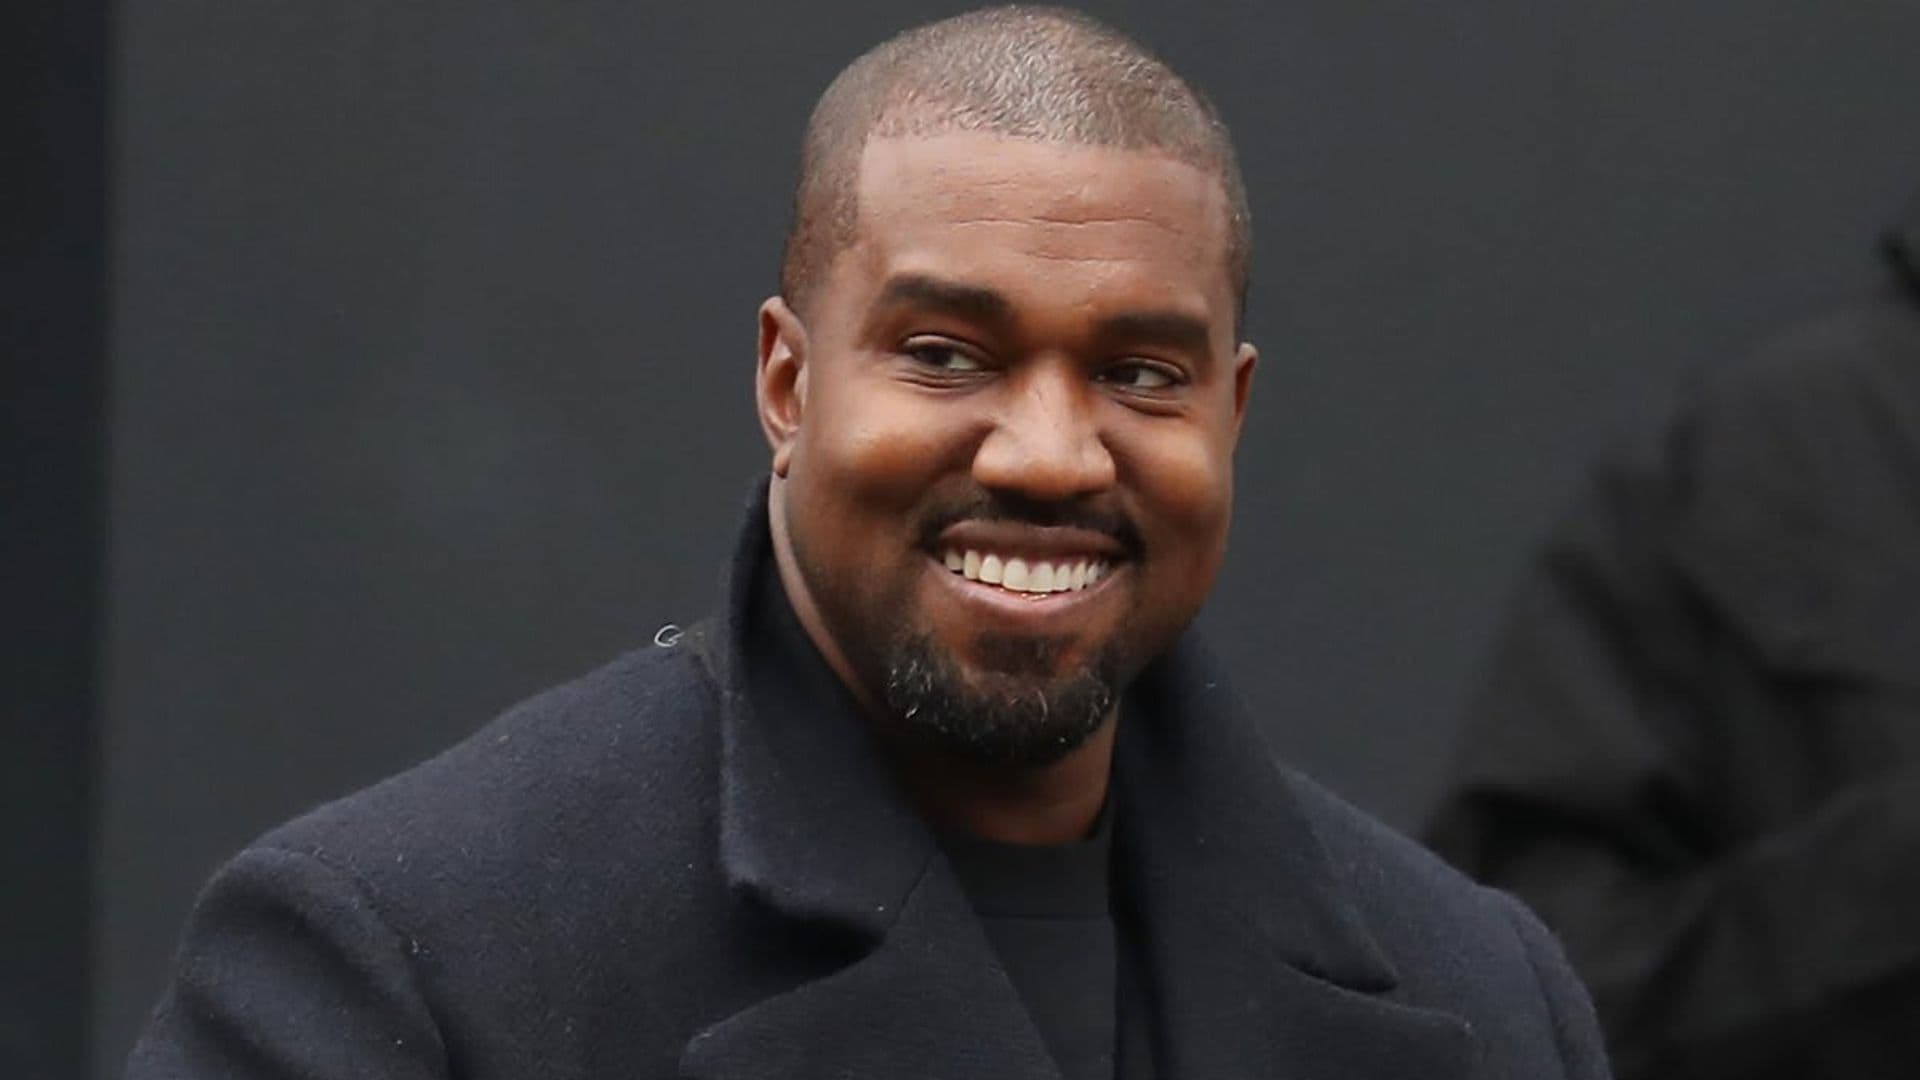 Kanye West ‘moving to a different stadium’ to finish his album ‘DONDA’